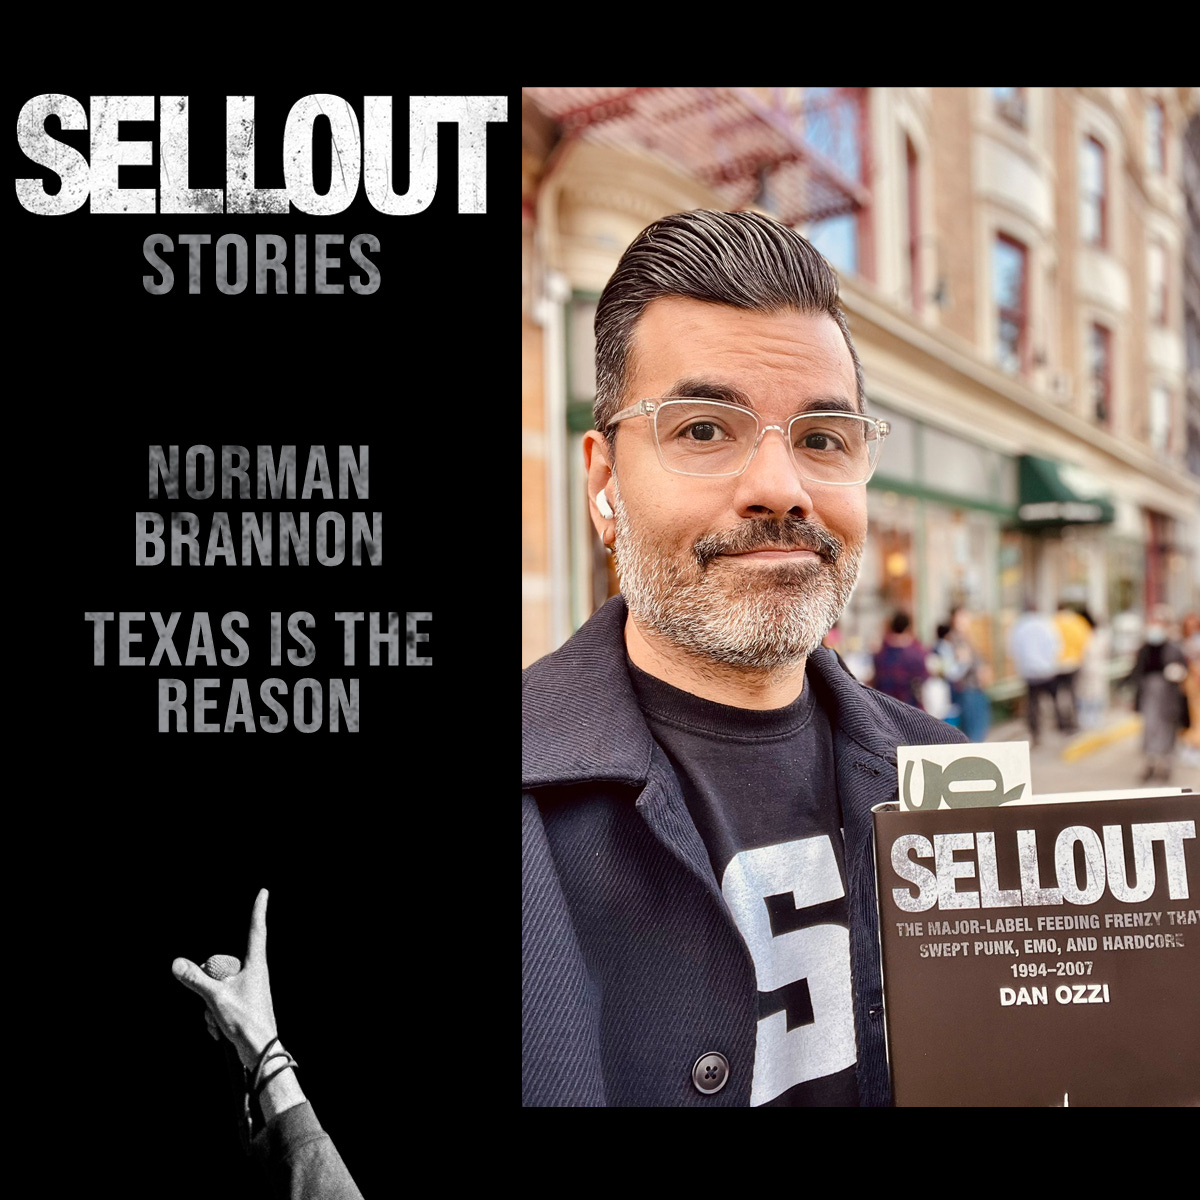 Sellout Stories: Norman Brannon (Texas Is the Reason)